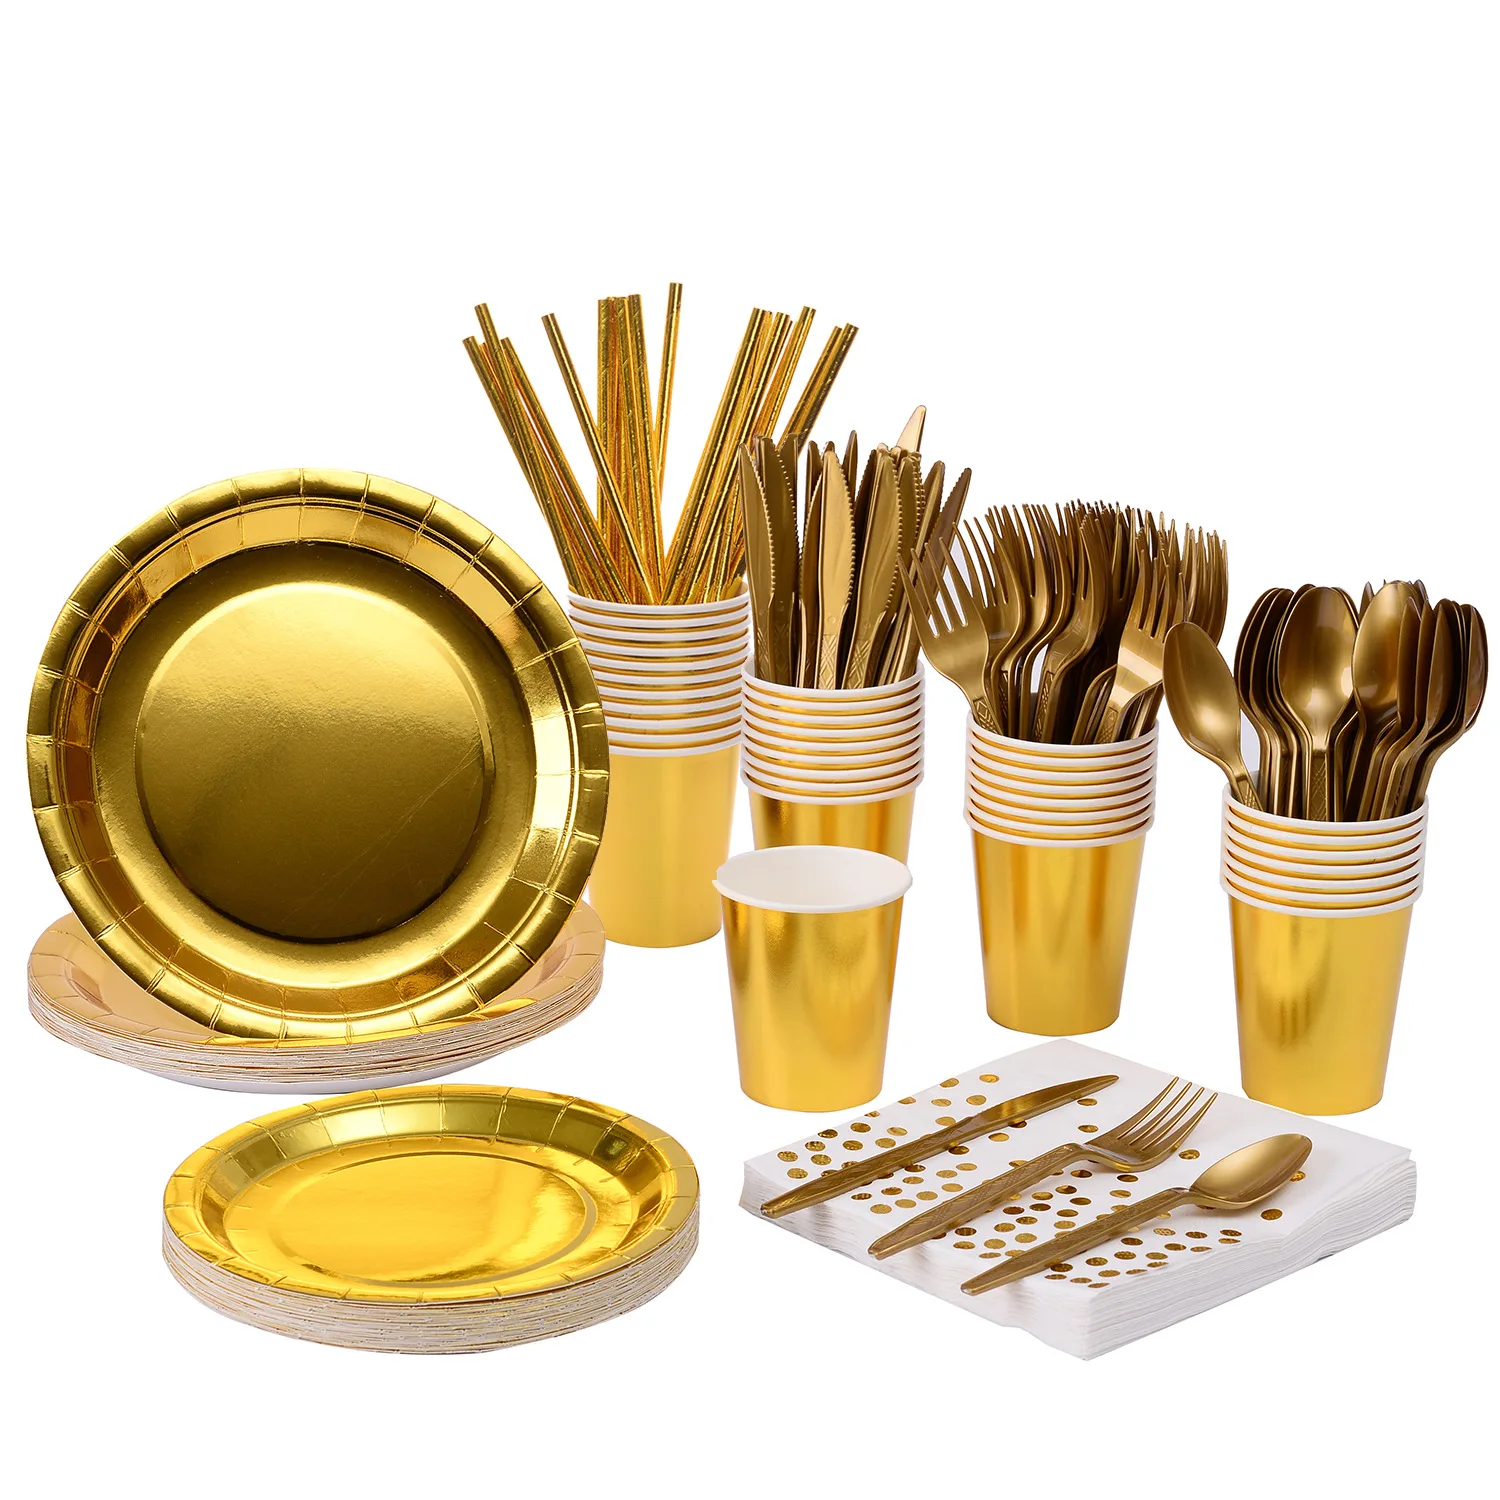 

200 PCS Gold Disposable Tableware Set,Serves 25 Party Christmas Wedding Birthday Paper Straws Napkins Plates Cups Cutlery Kit